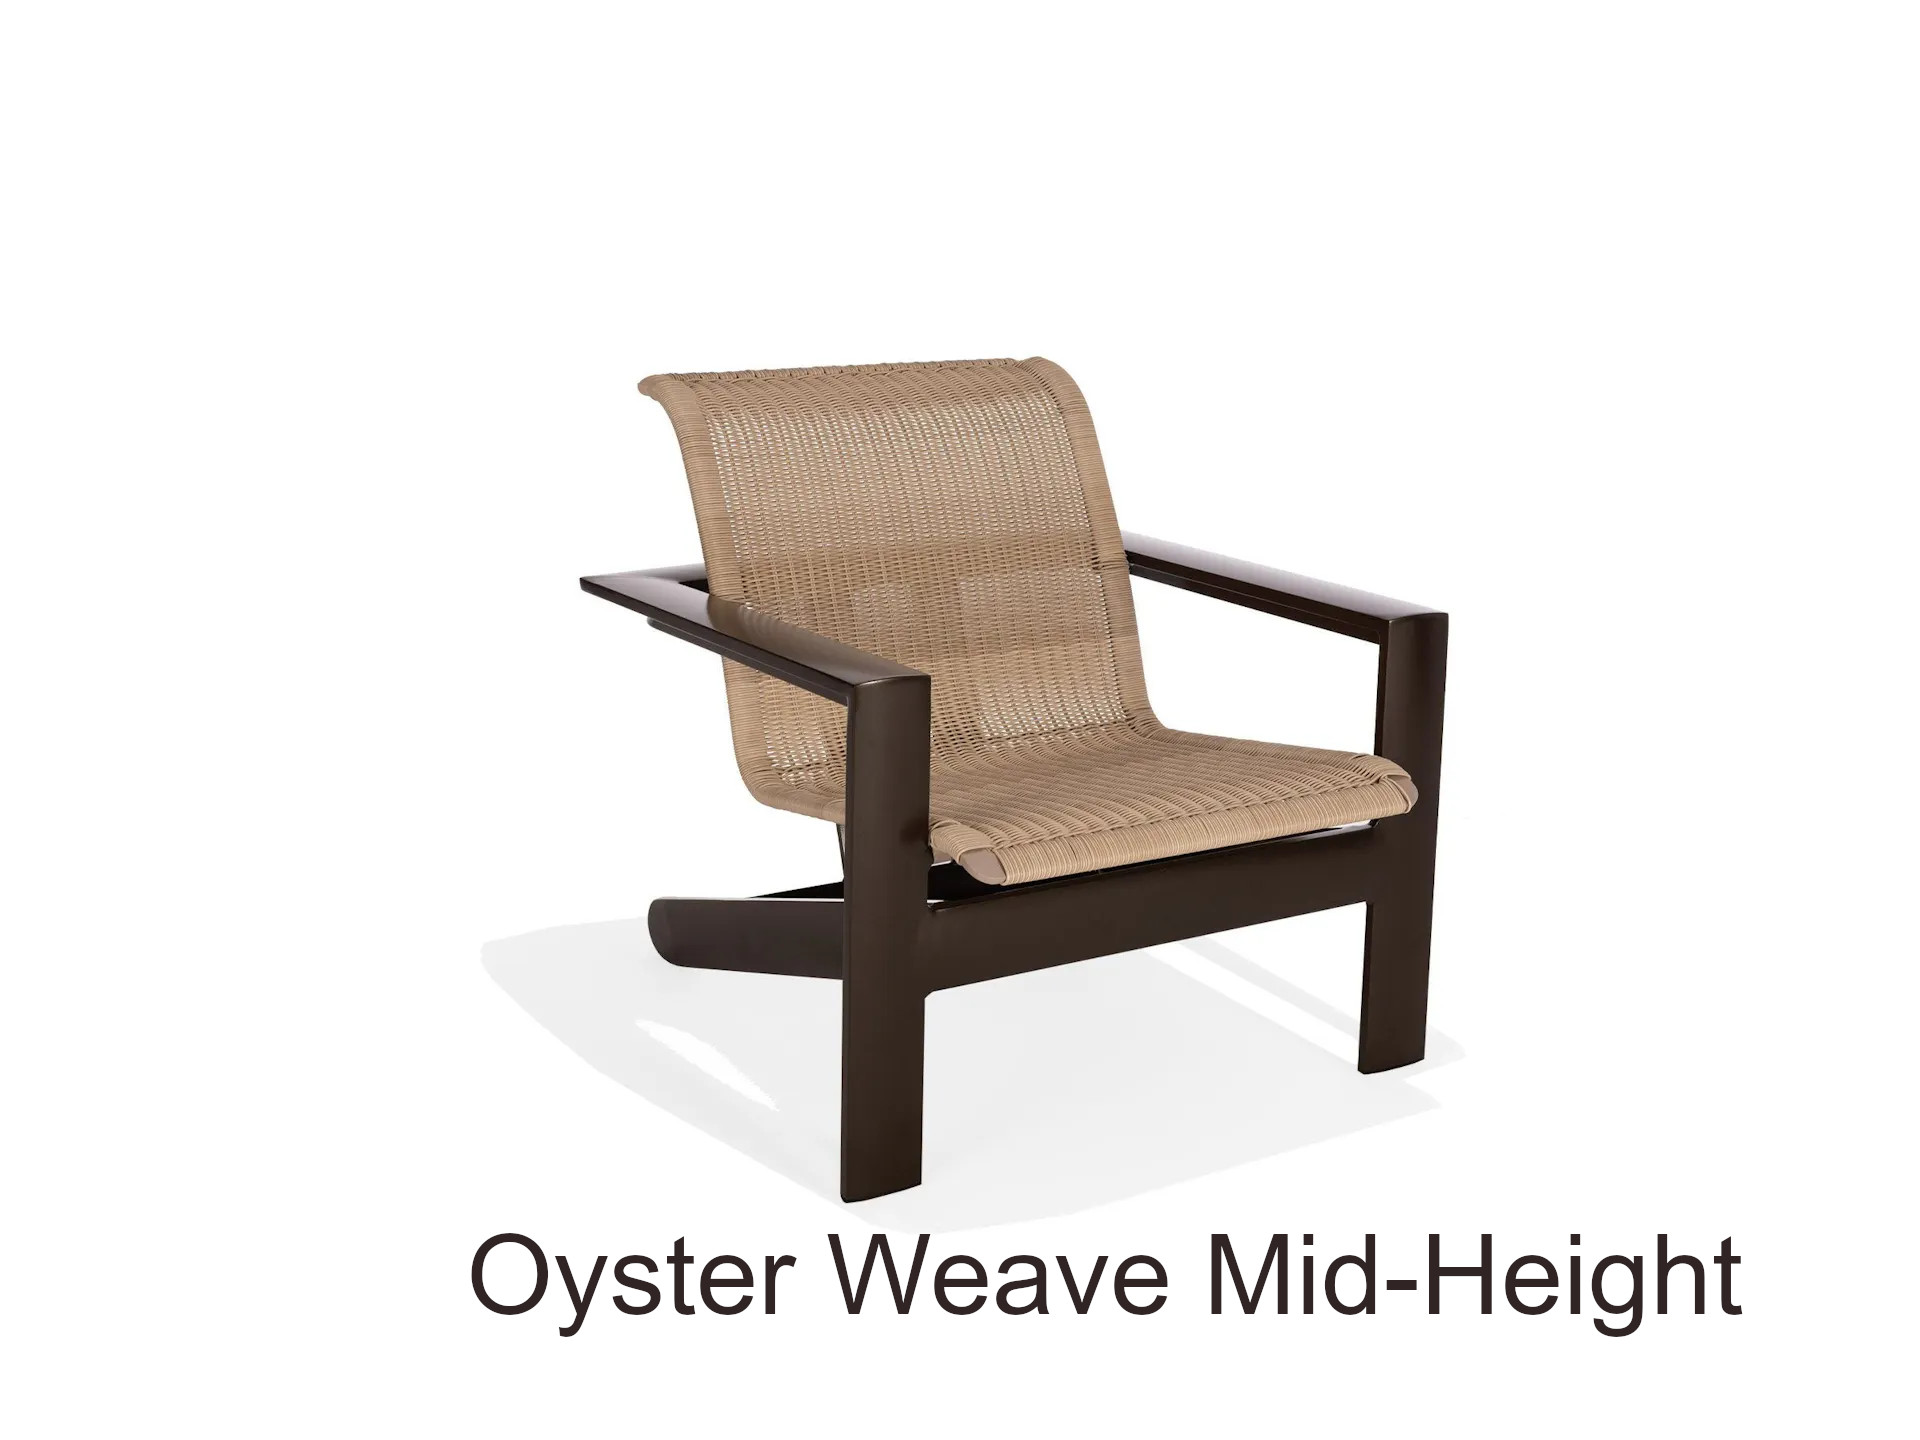 Oyster Weave Mid-Height Adirondack Chair